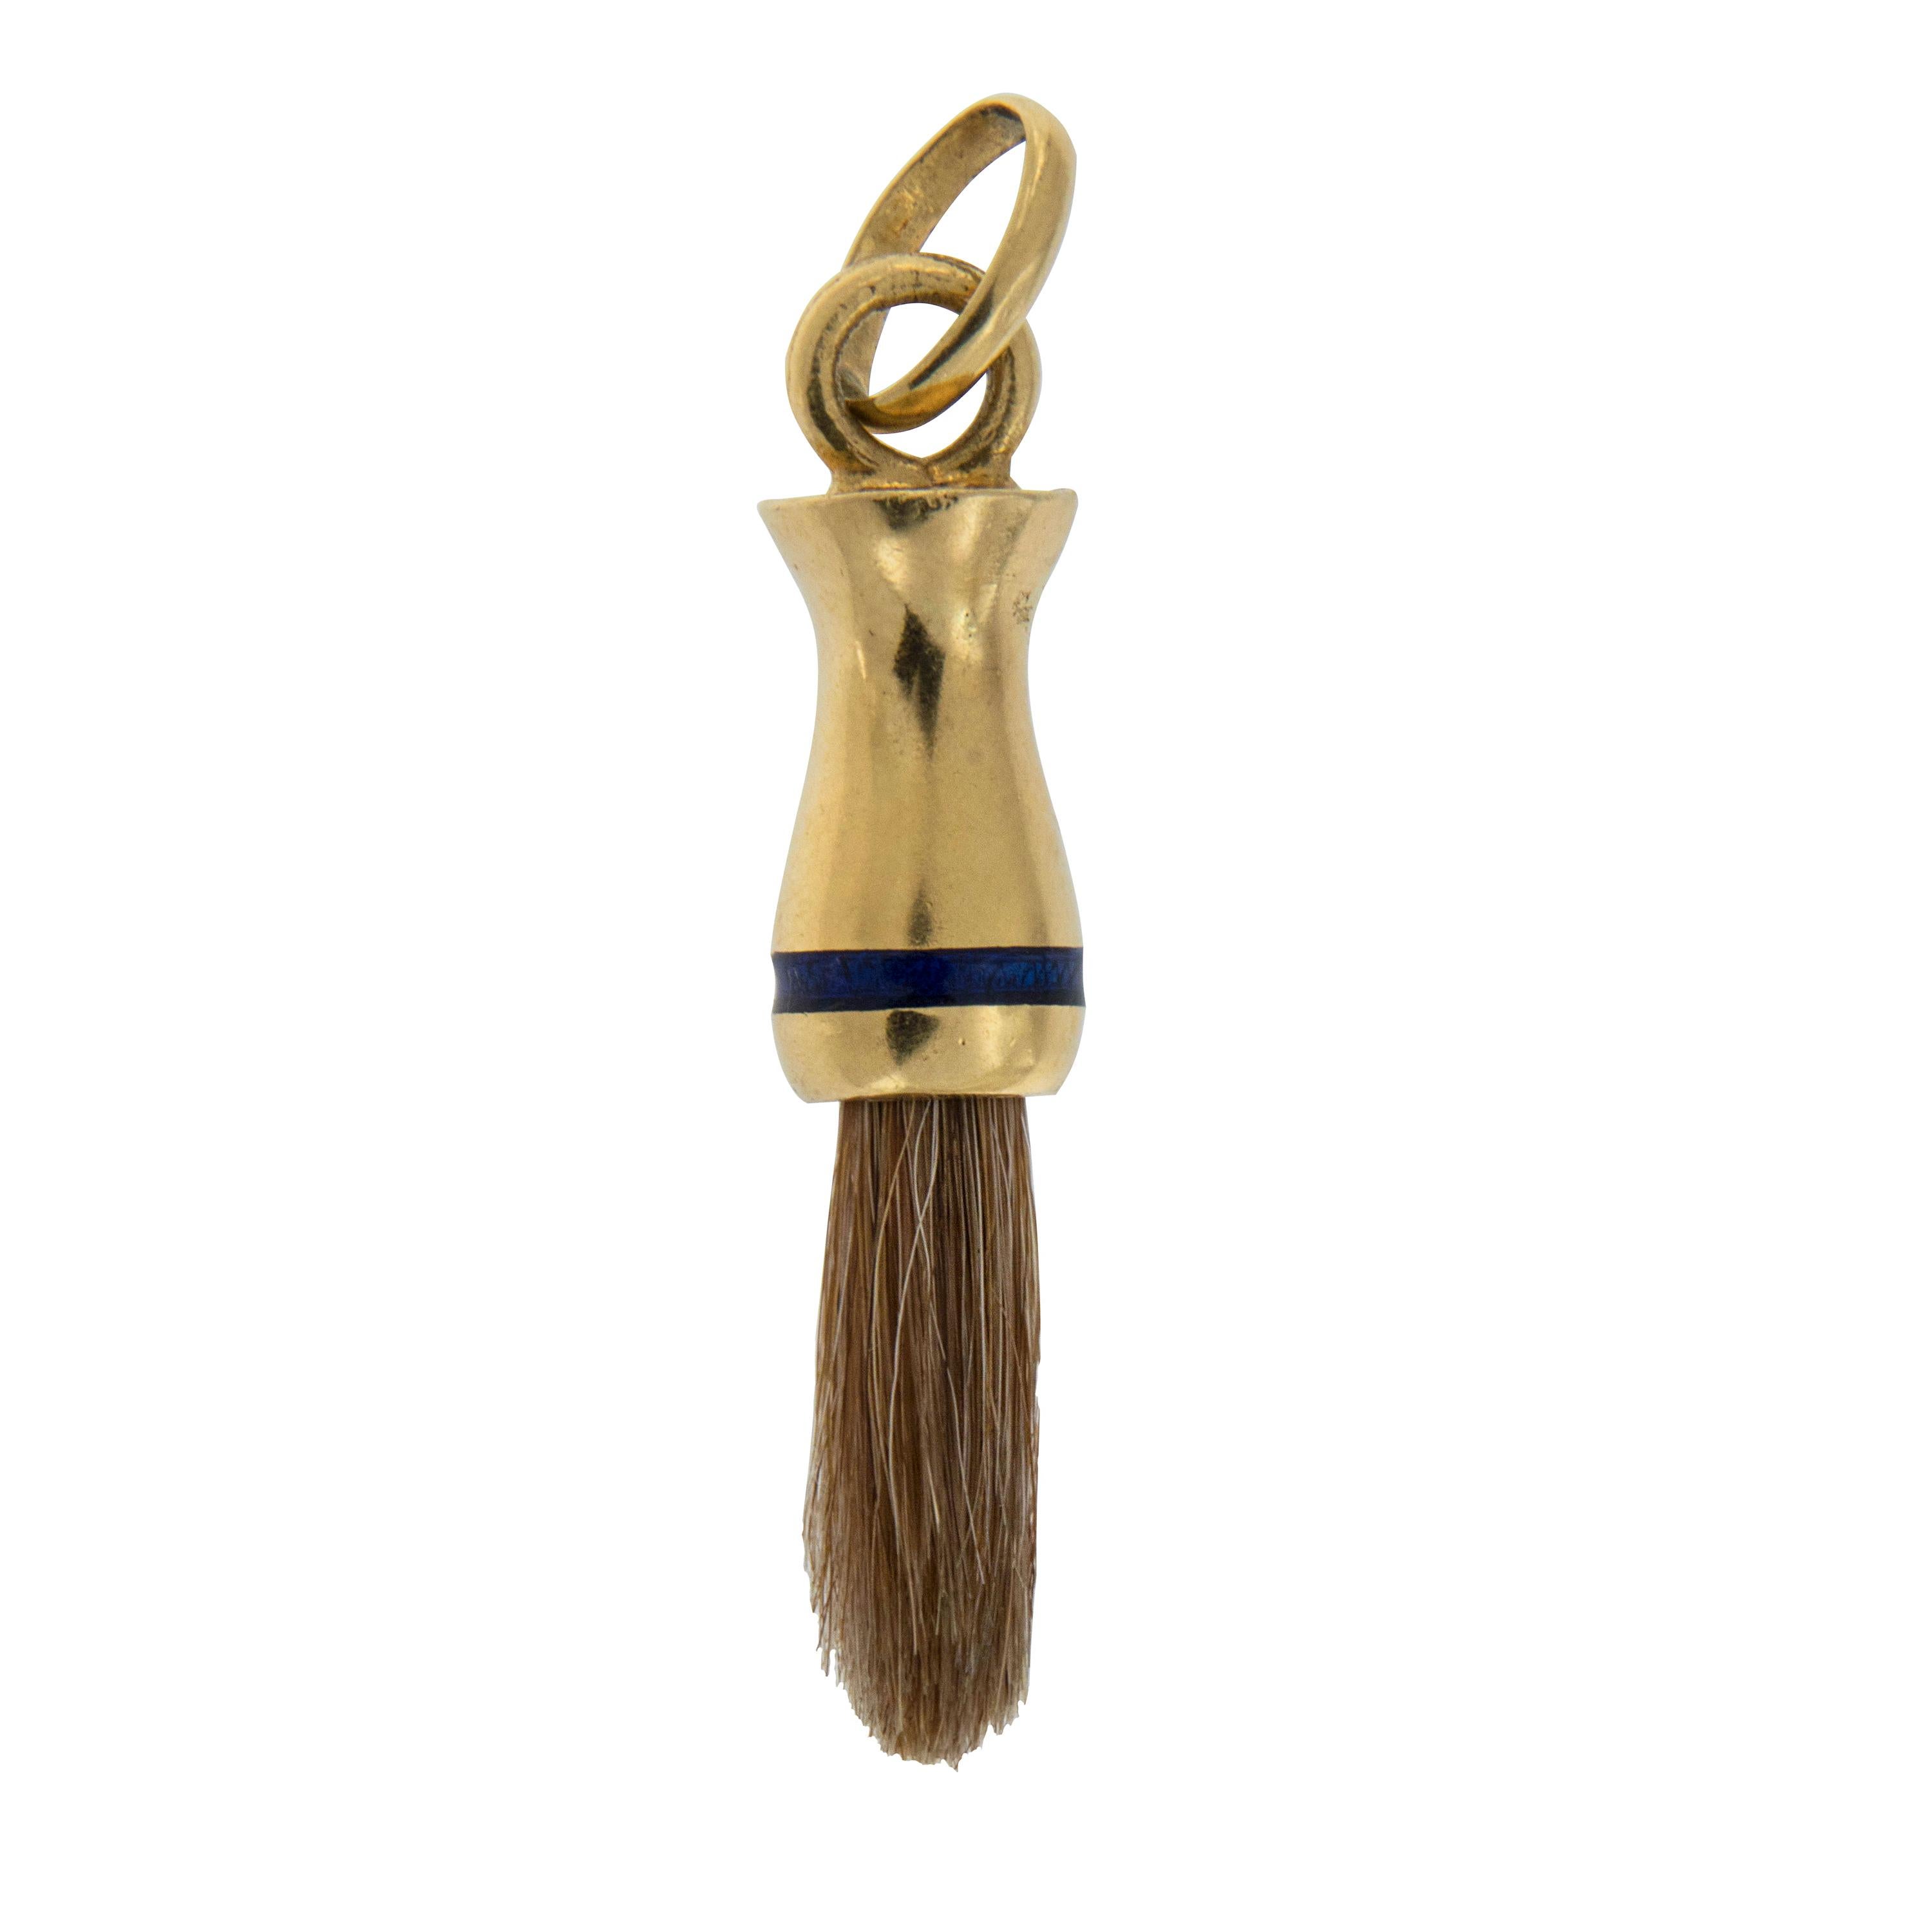 Vintage 18 karat yellow gold barbers neck dusting brush charm with real sable hair! 

1.5